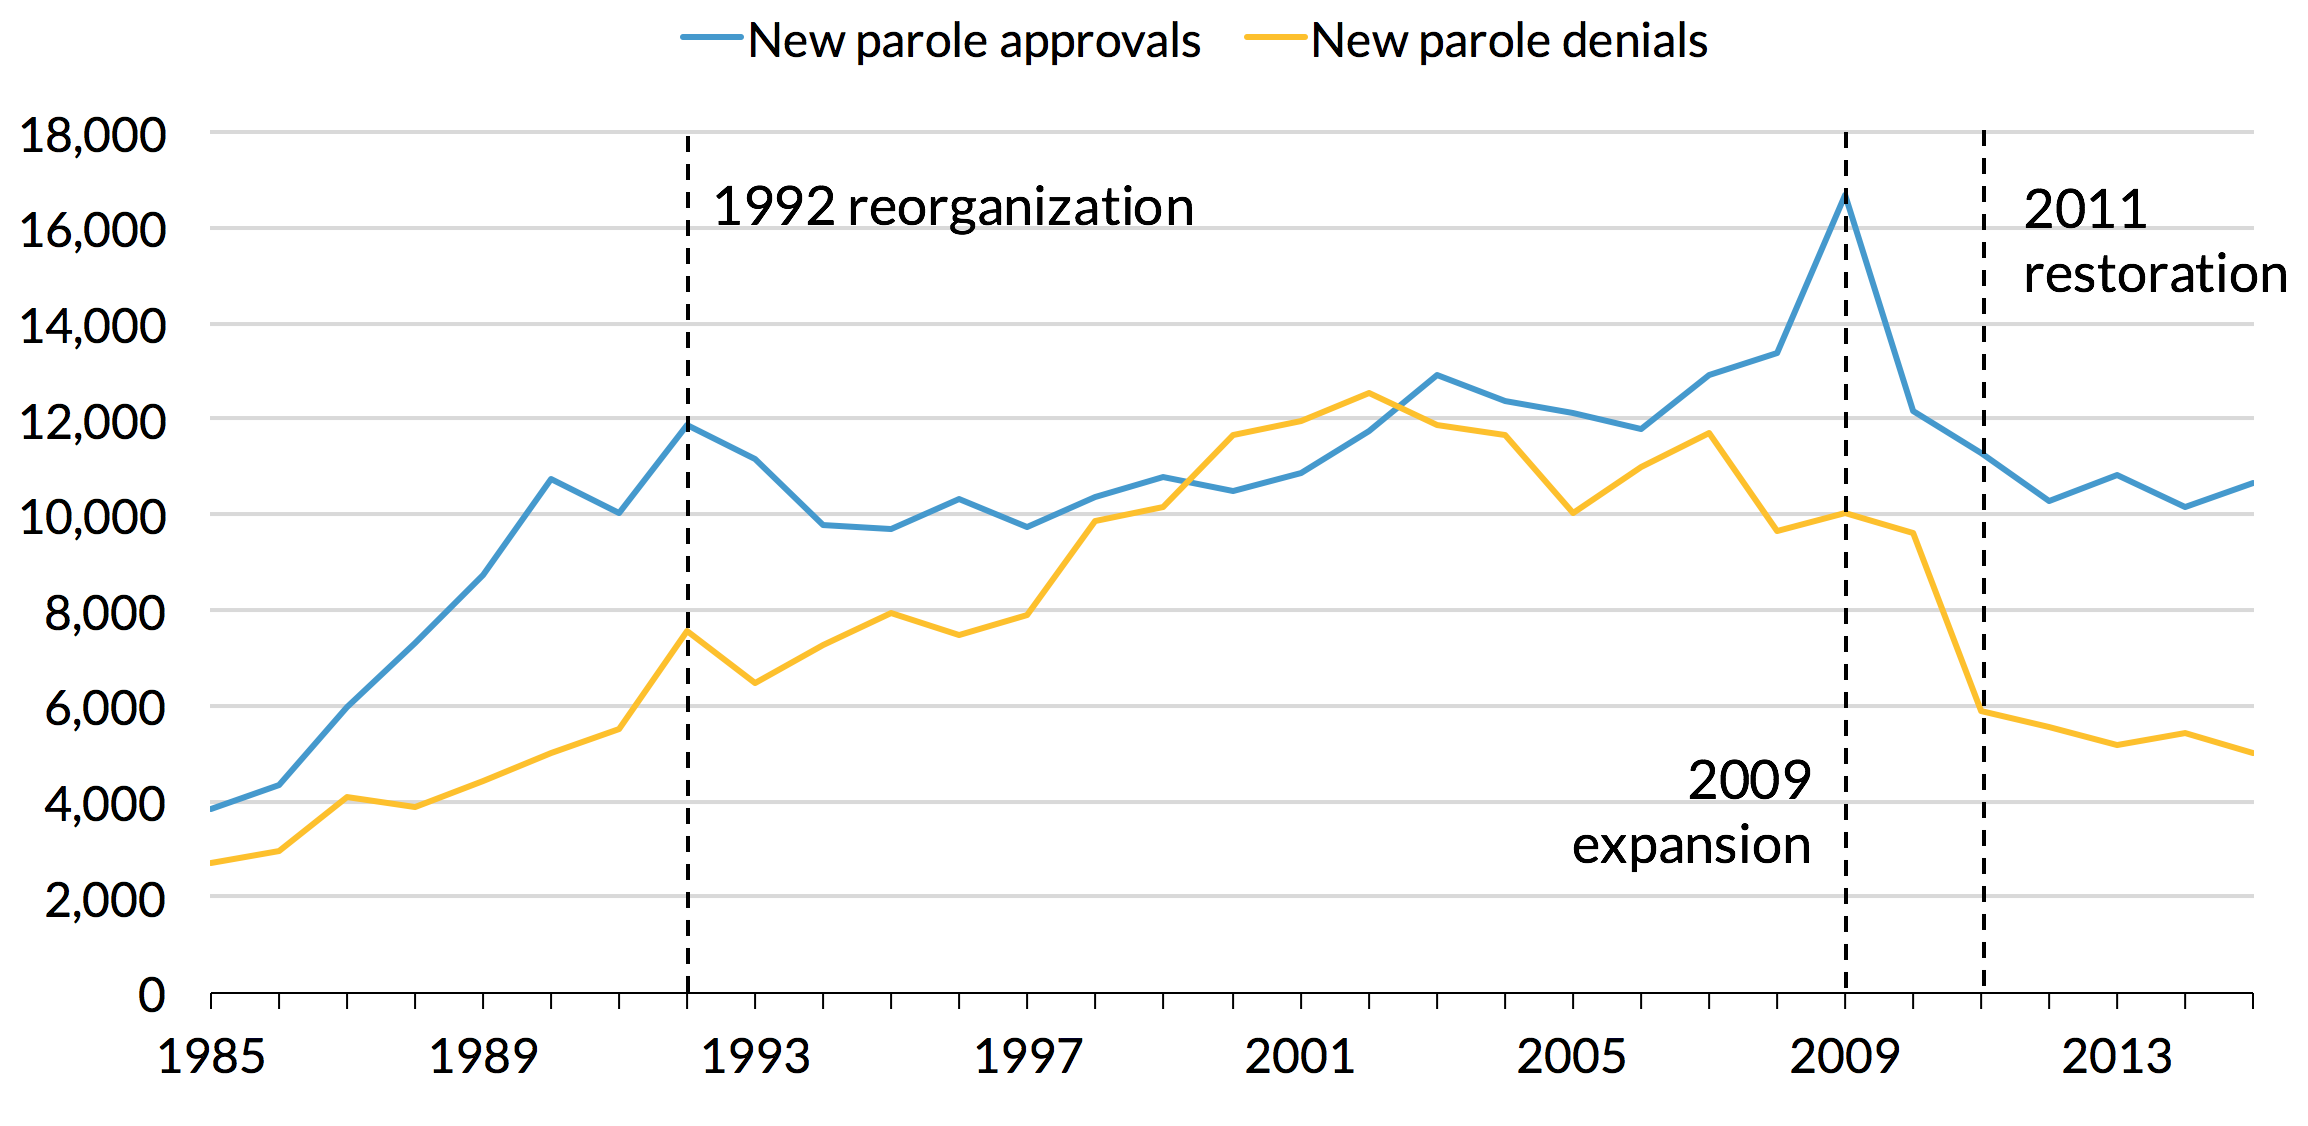 A line chart demonstrating trends in parole approvals and denials in Michigan, from 1985 to 2015. Both parole approvals and denials rose steadily from 1985 to 1992, approvals from 3,856 to 10,664 and denials from 2,694 to 5,021. In 1992 there was a reorganization of the parole board. From 1992 to 2009 approvals rose somewhat steadily from 11,854 to 16,695, and denials rose, with some periods of decrease, from 7,553 to 10,044. In 2009 there was an expansion of the parole board. From 2009 to 2011 parole denials decreased somewhat steadily from 10,044 to 5,907. Parole approvals spiked in 2010 to 12,178, then decreased to 11,265 in 2011. In 2011 there was a restoration of the previous parole board structure. From 2011 to 2015 parole approvals decreased slightly from 11,265 to 10,664, and parole denials decreased slightly from 5,907 to 5,021.